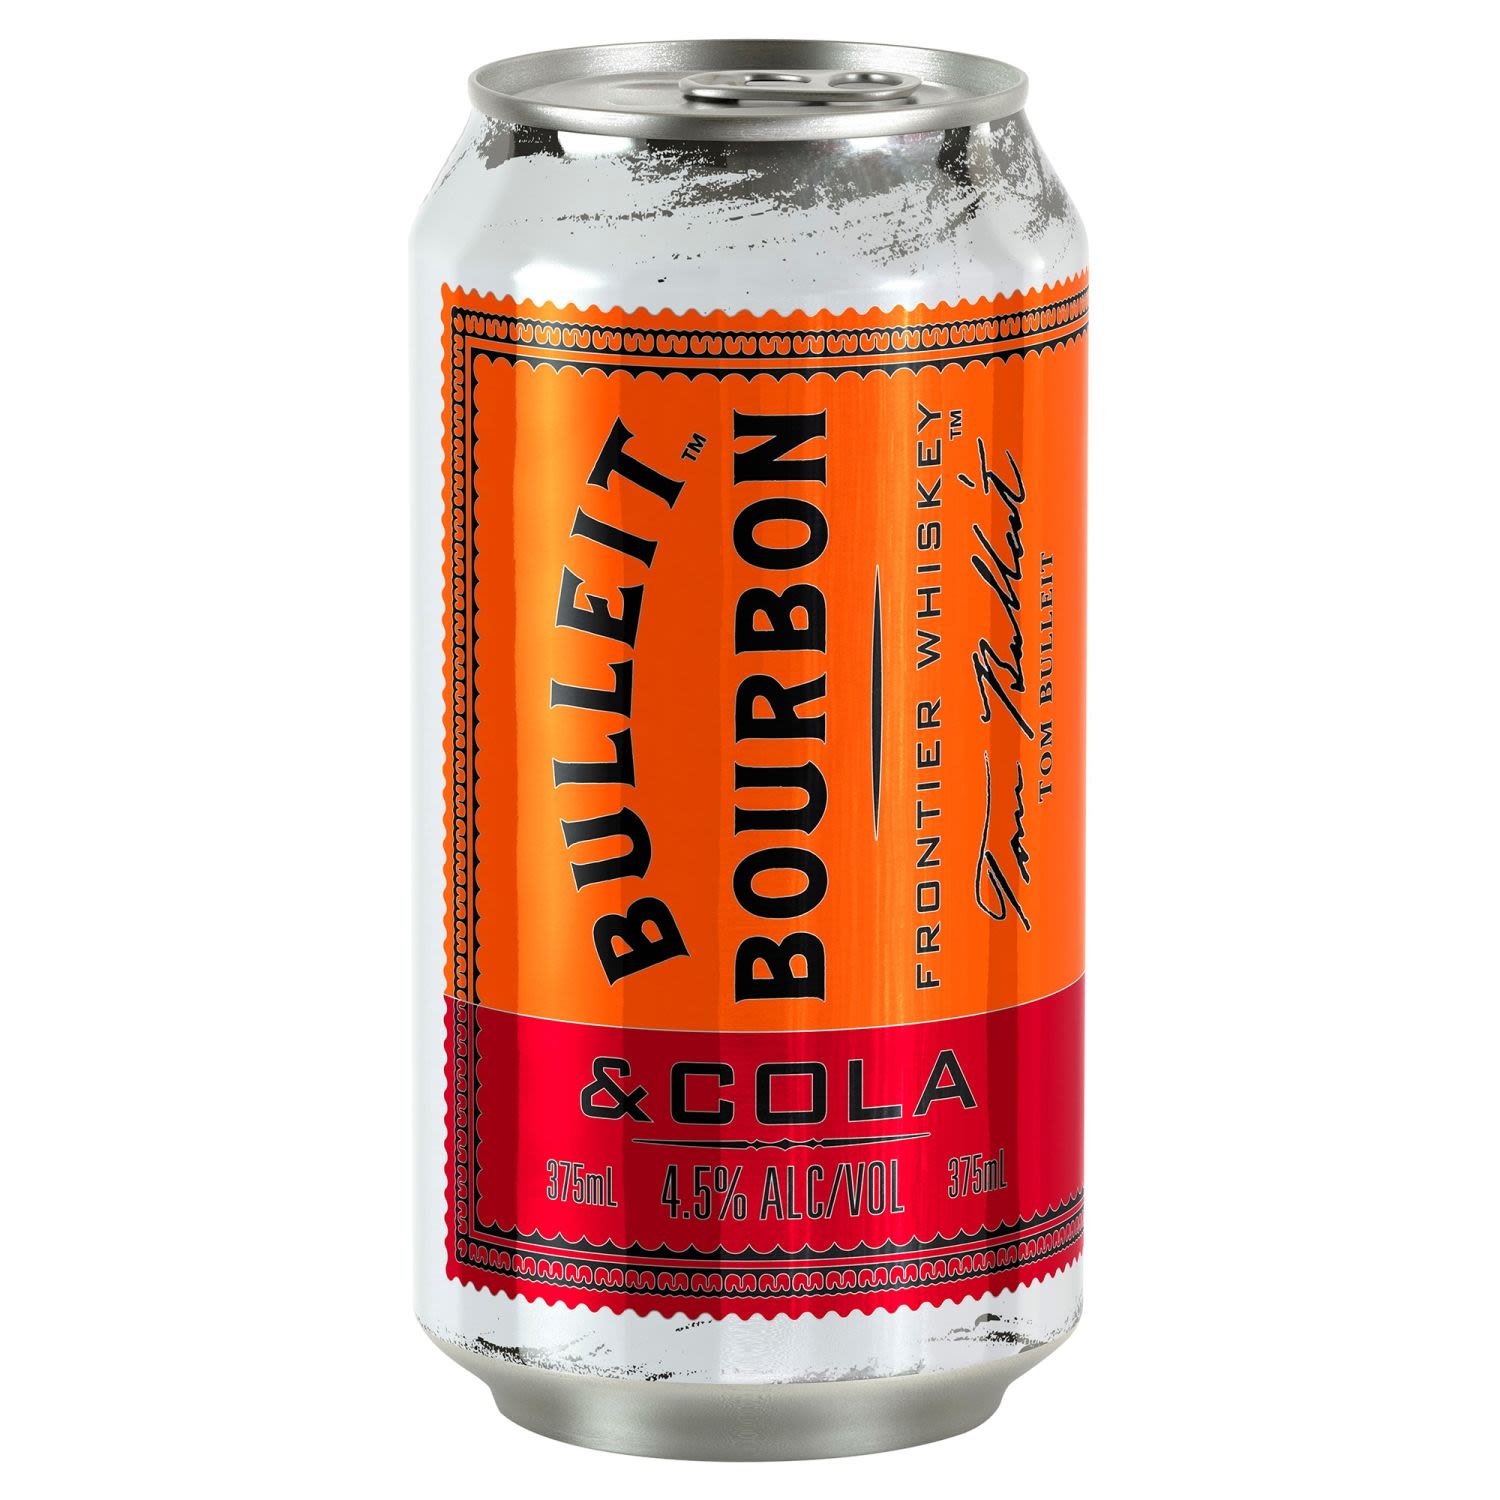 Bulleit Bourbon and Cola 4.5% Can 375mL 24 Pack